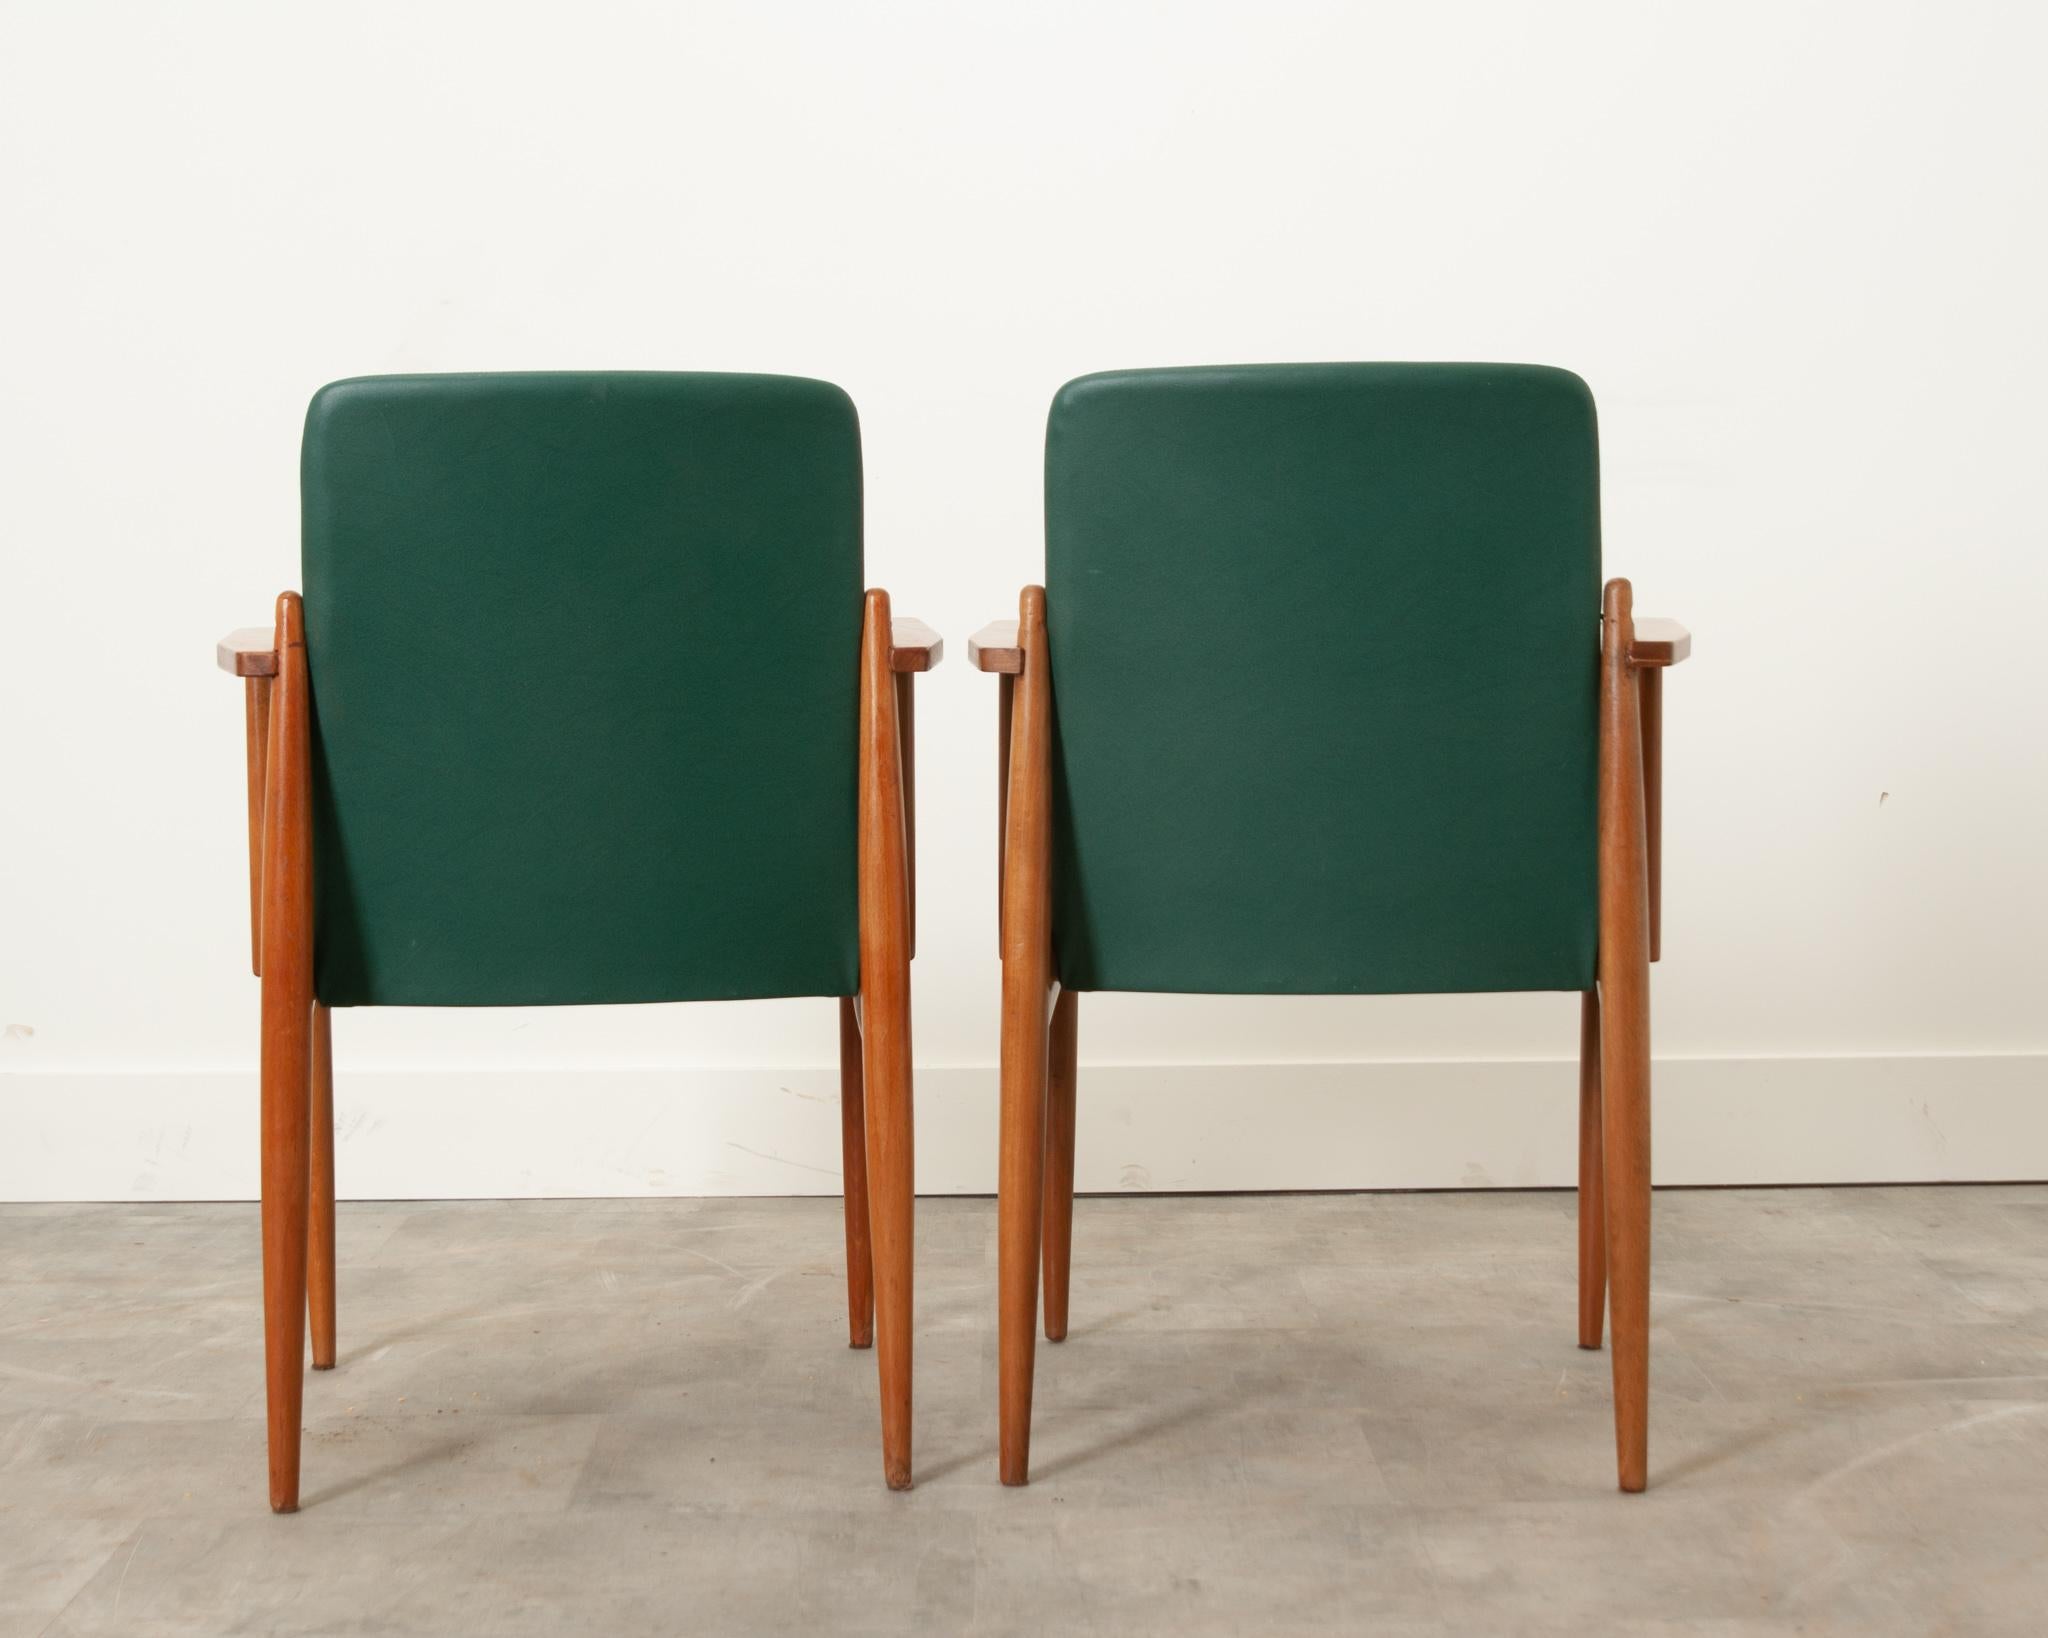 A stylish pair of Mid-Century Modern armchairs from 1960’s France. Chair slates are upholstered with green vinyl and a sleek frame crafted from fruitwood; these are the perfect way to add a pop of color to any living space. The seat height is 17-½”